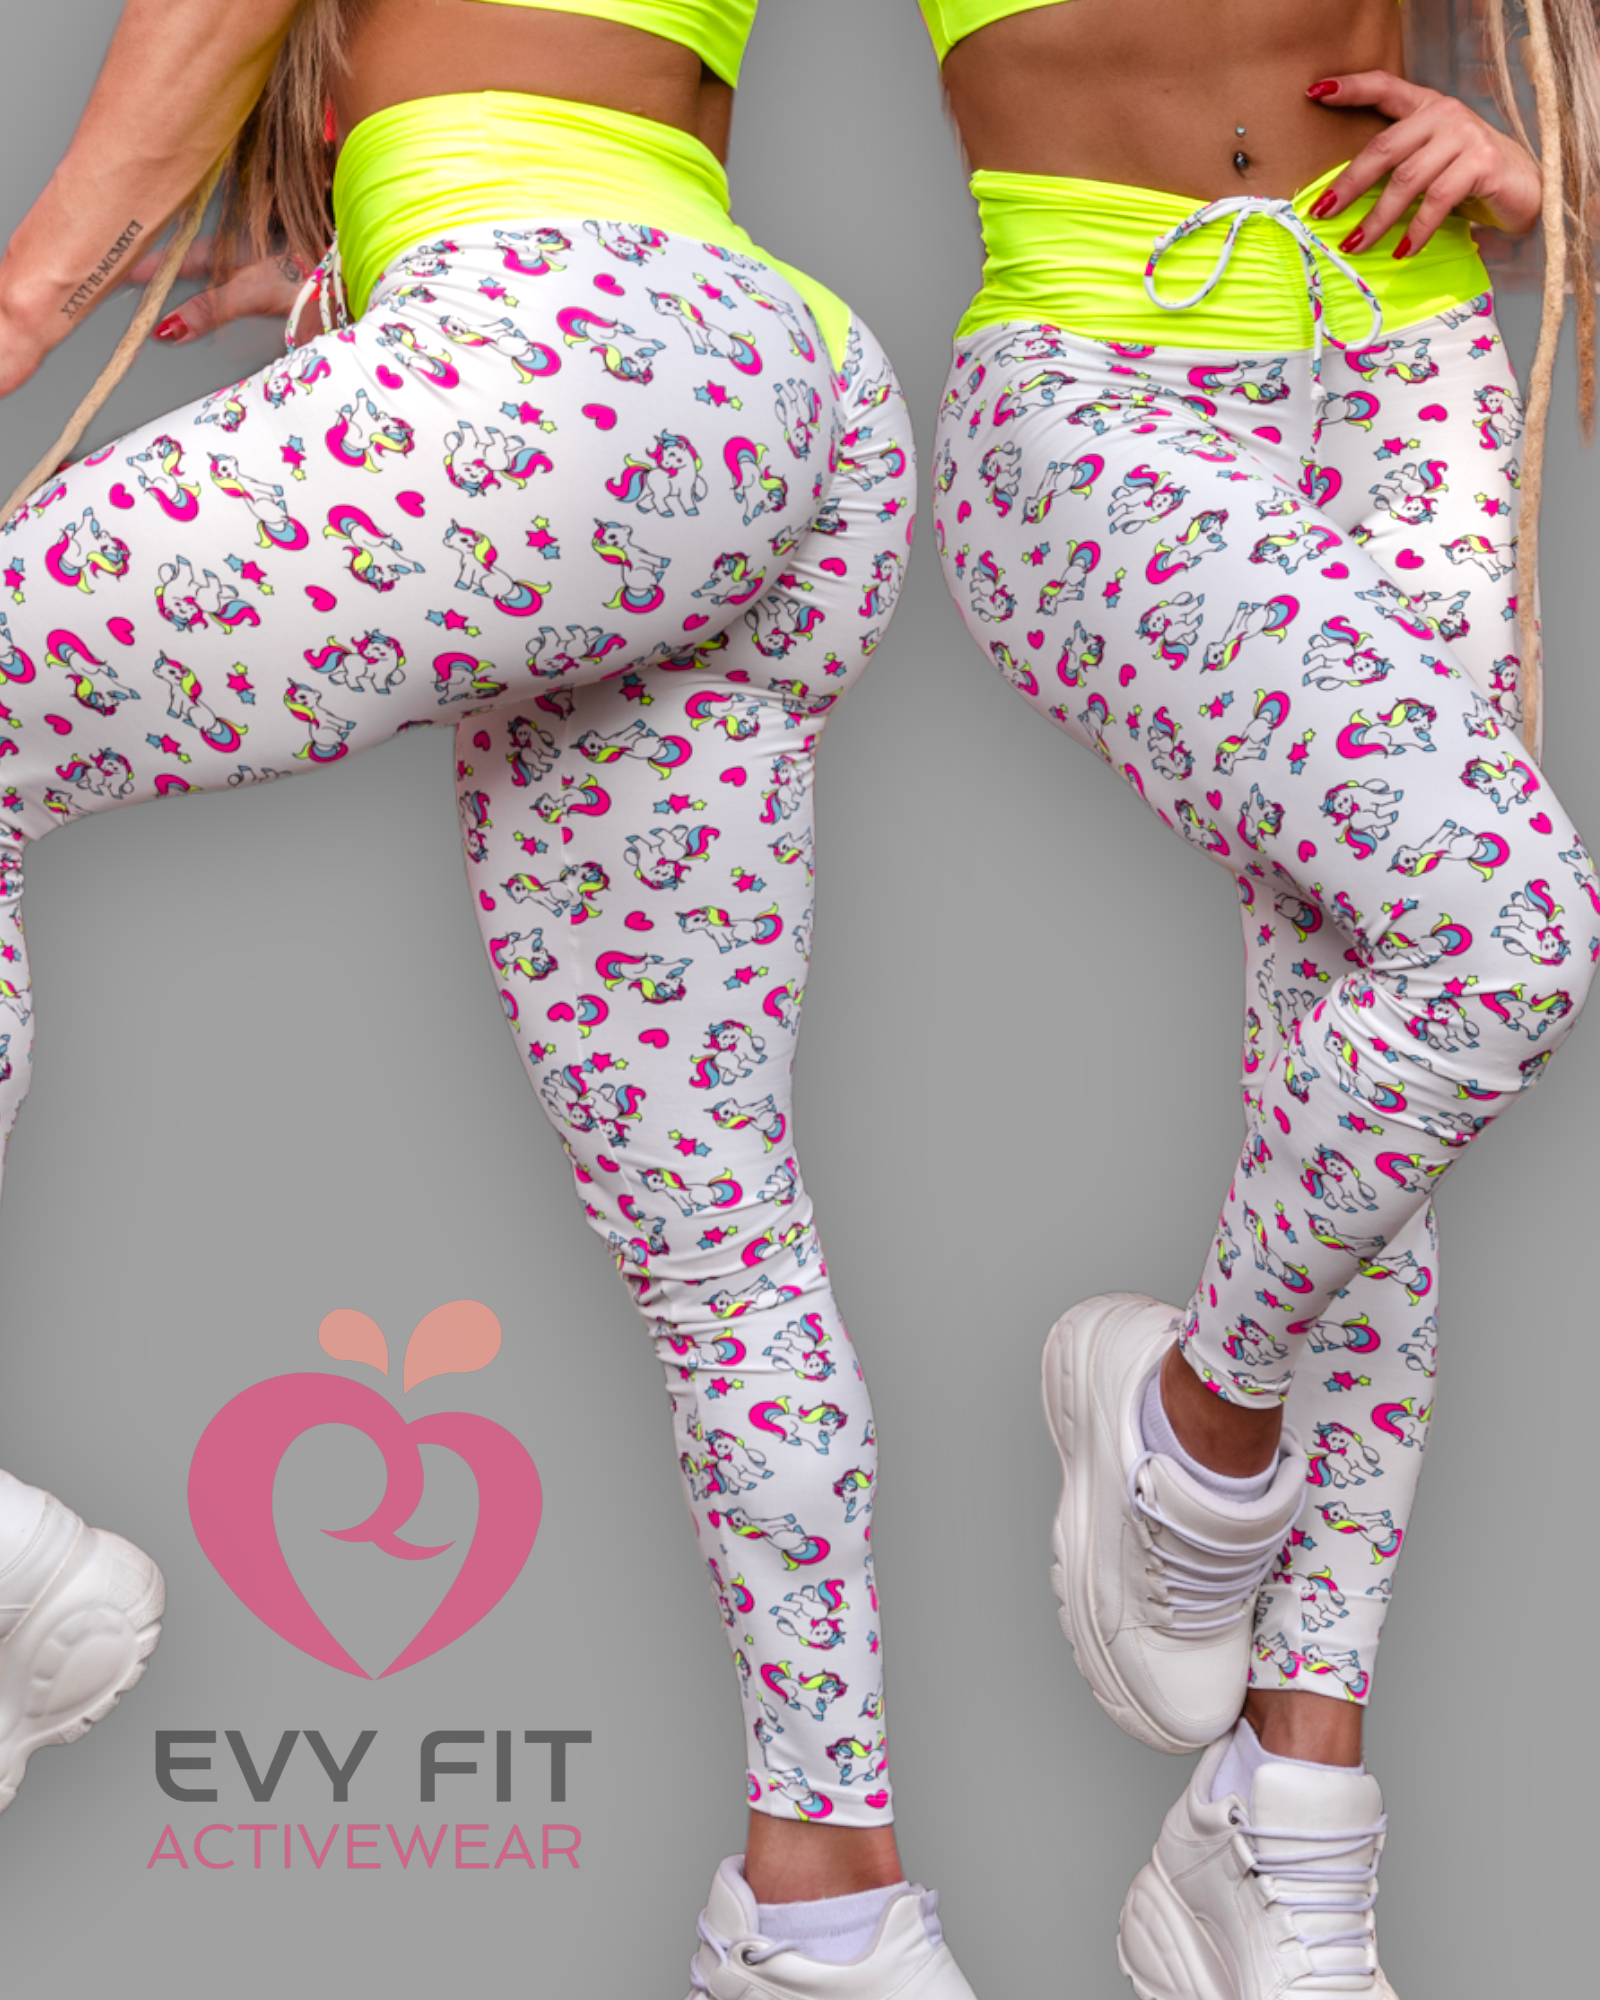 NEW COLORS V SCRUNCH COLLECTION WWW.EVYFITACTIVEWEAR.COM